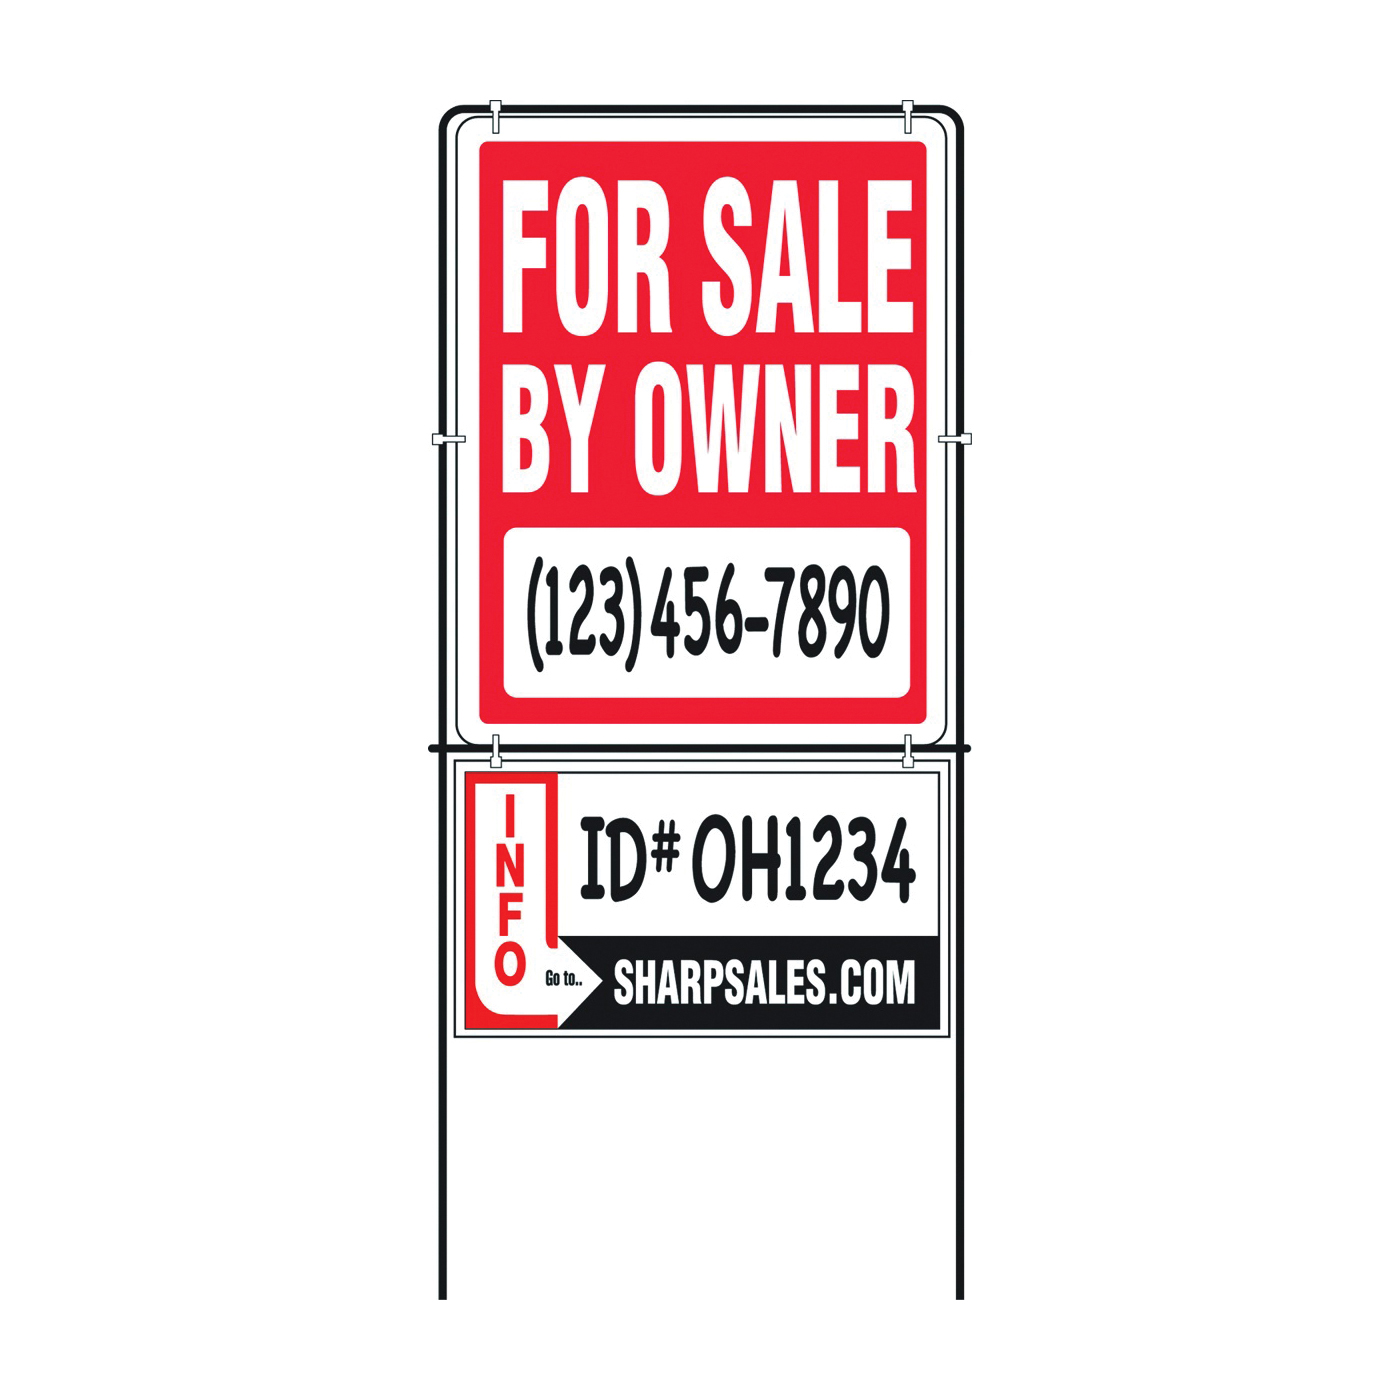 SIY-201 Real Estate Sign with Frame, For Sale By Owner, White Legend, Plastic, 14 in W x 18 in H Dimensions